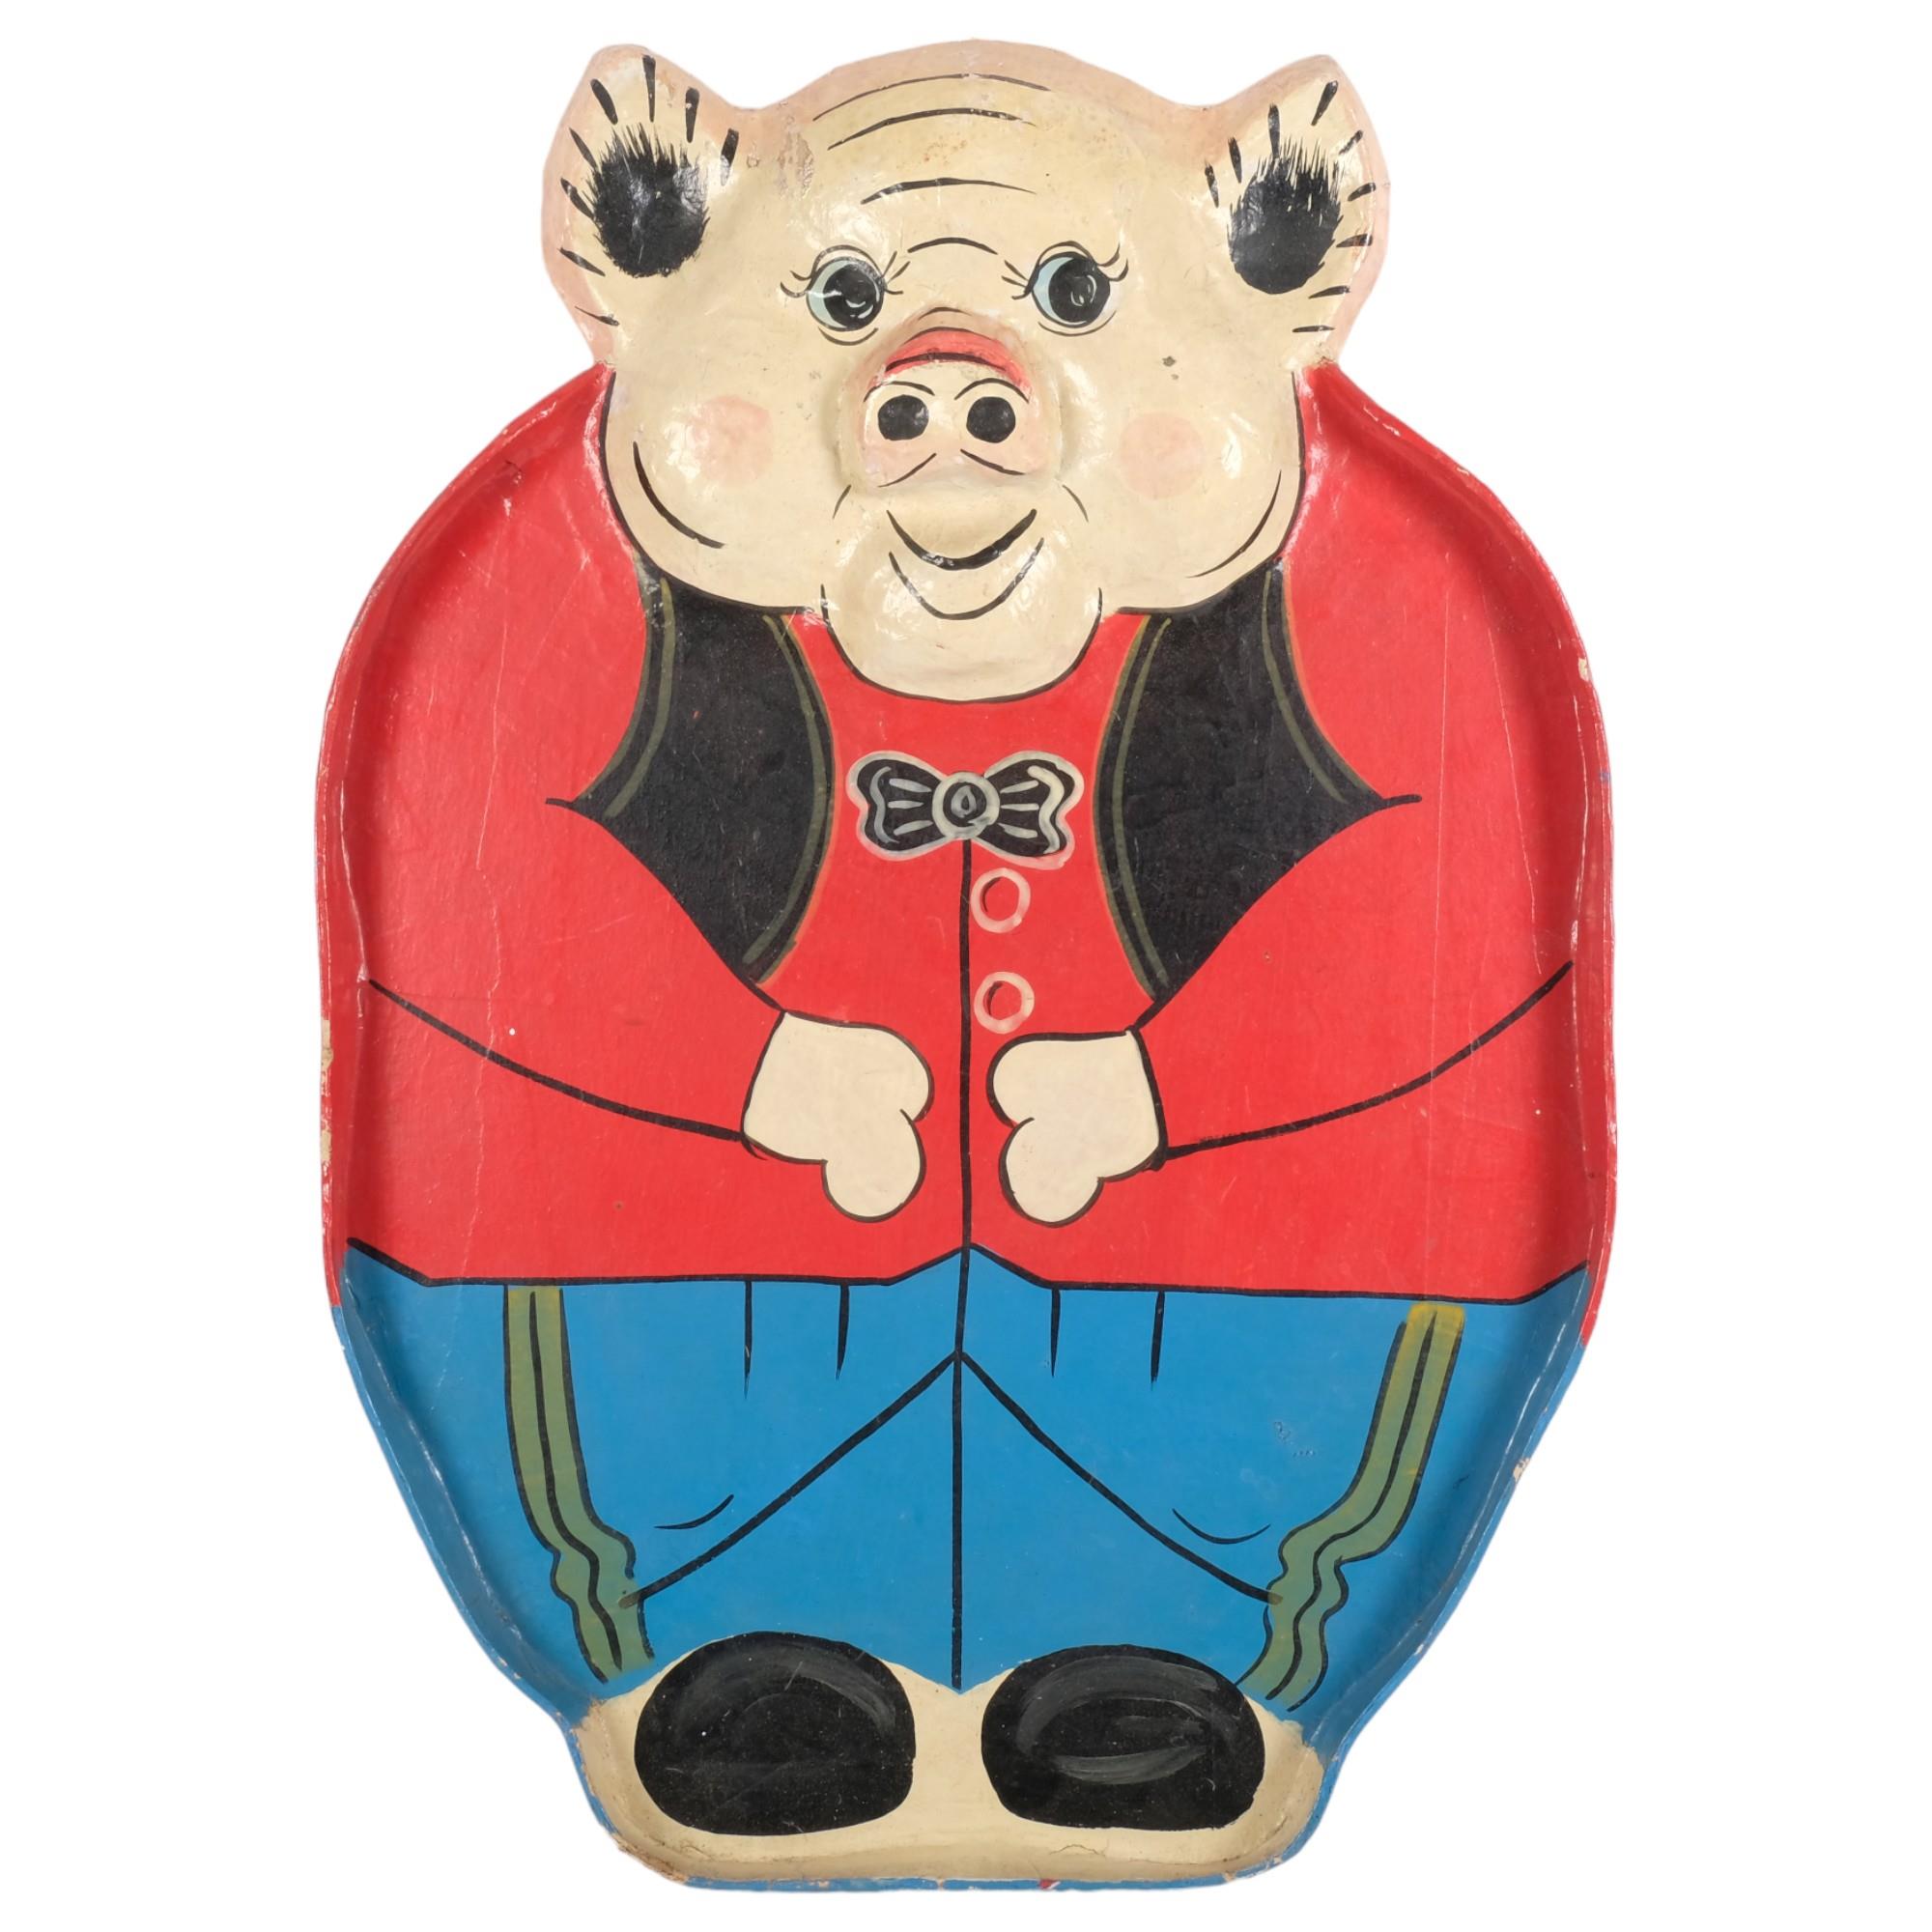 A Vintage papier mache serving tray or board game, in the form of a pig, 58cm x 40cm